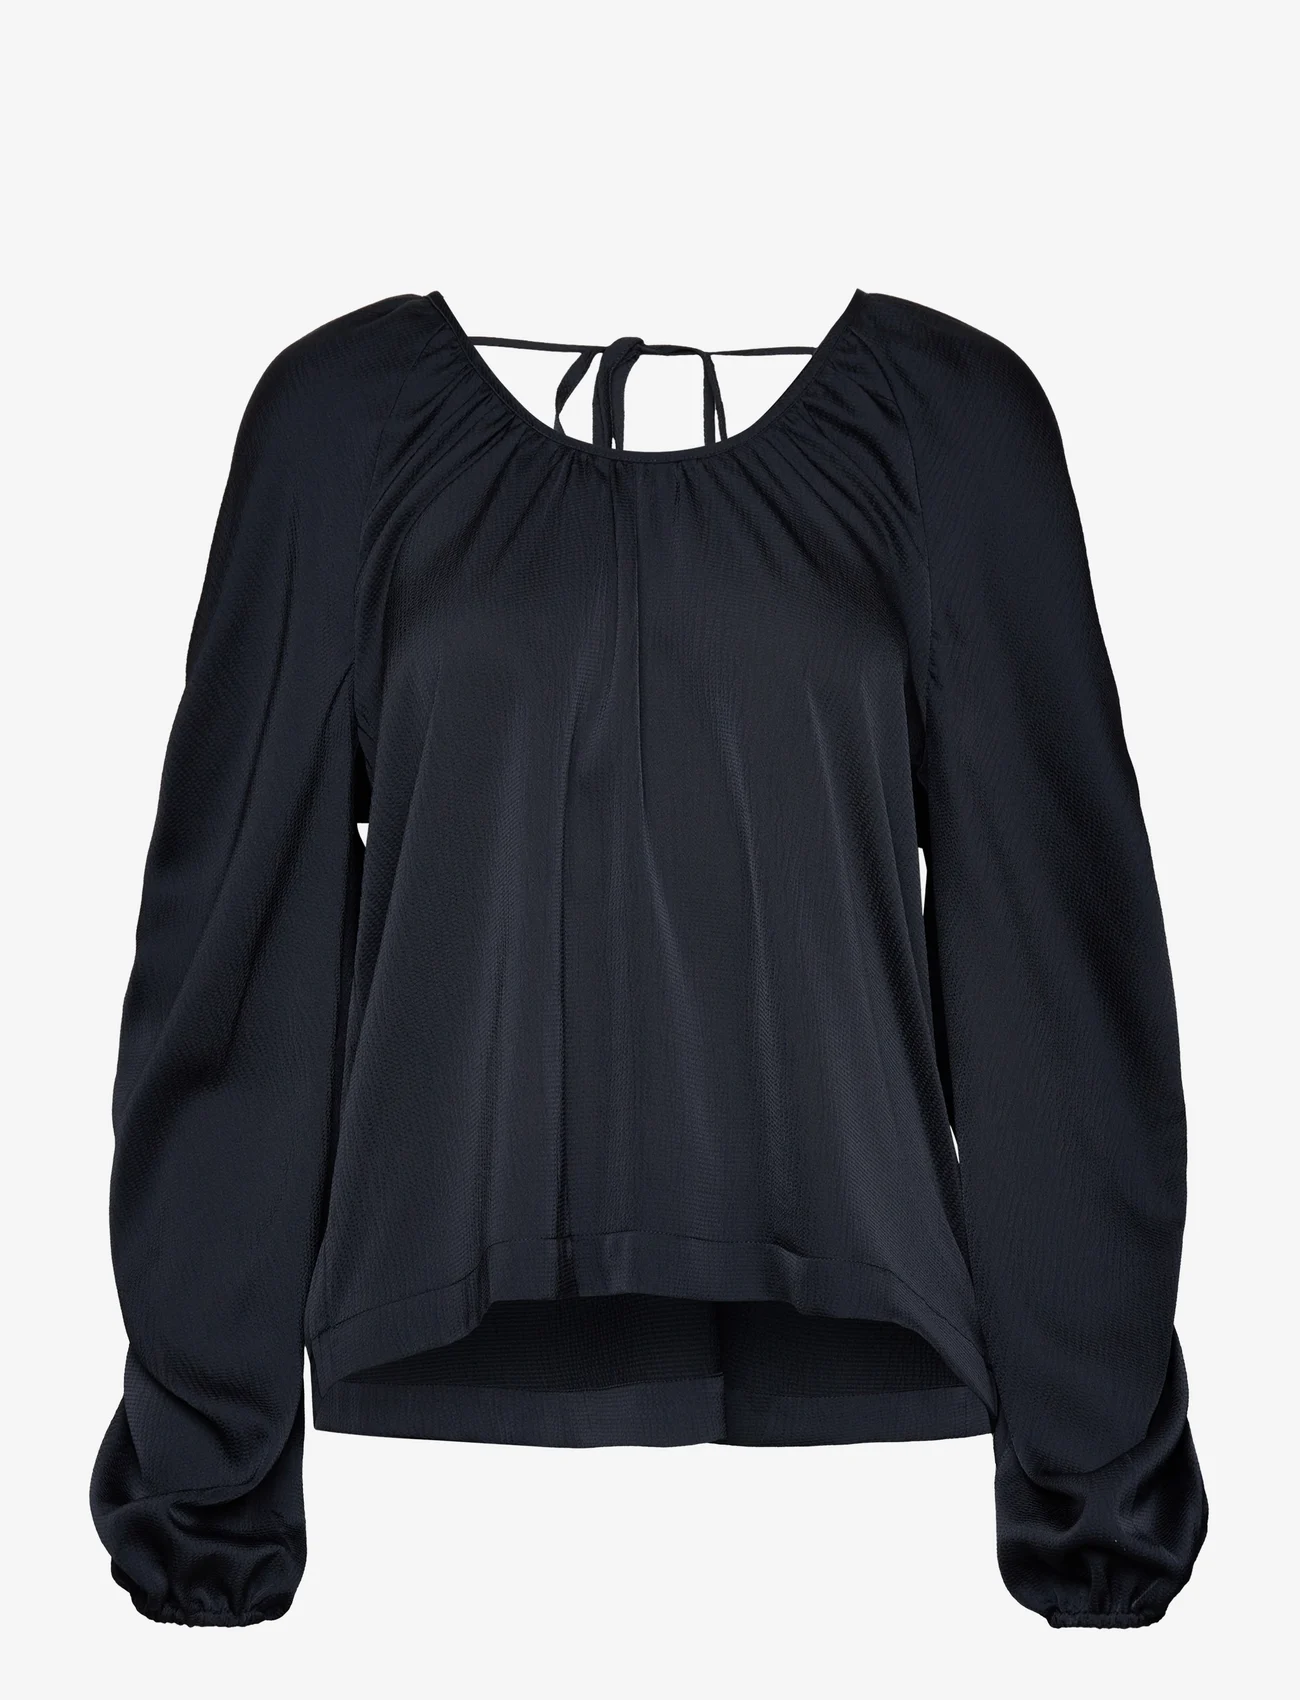 2NDDAY - 2ND Liana - Modern Structure - long-sleeved blouses - dark navy - 0